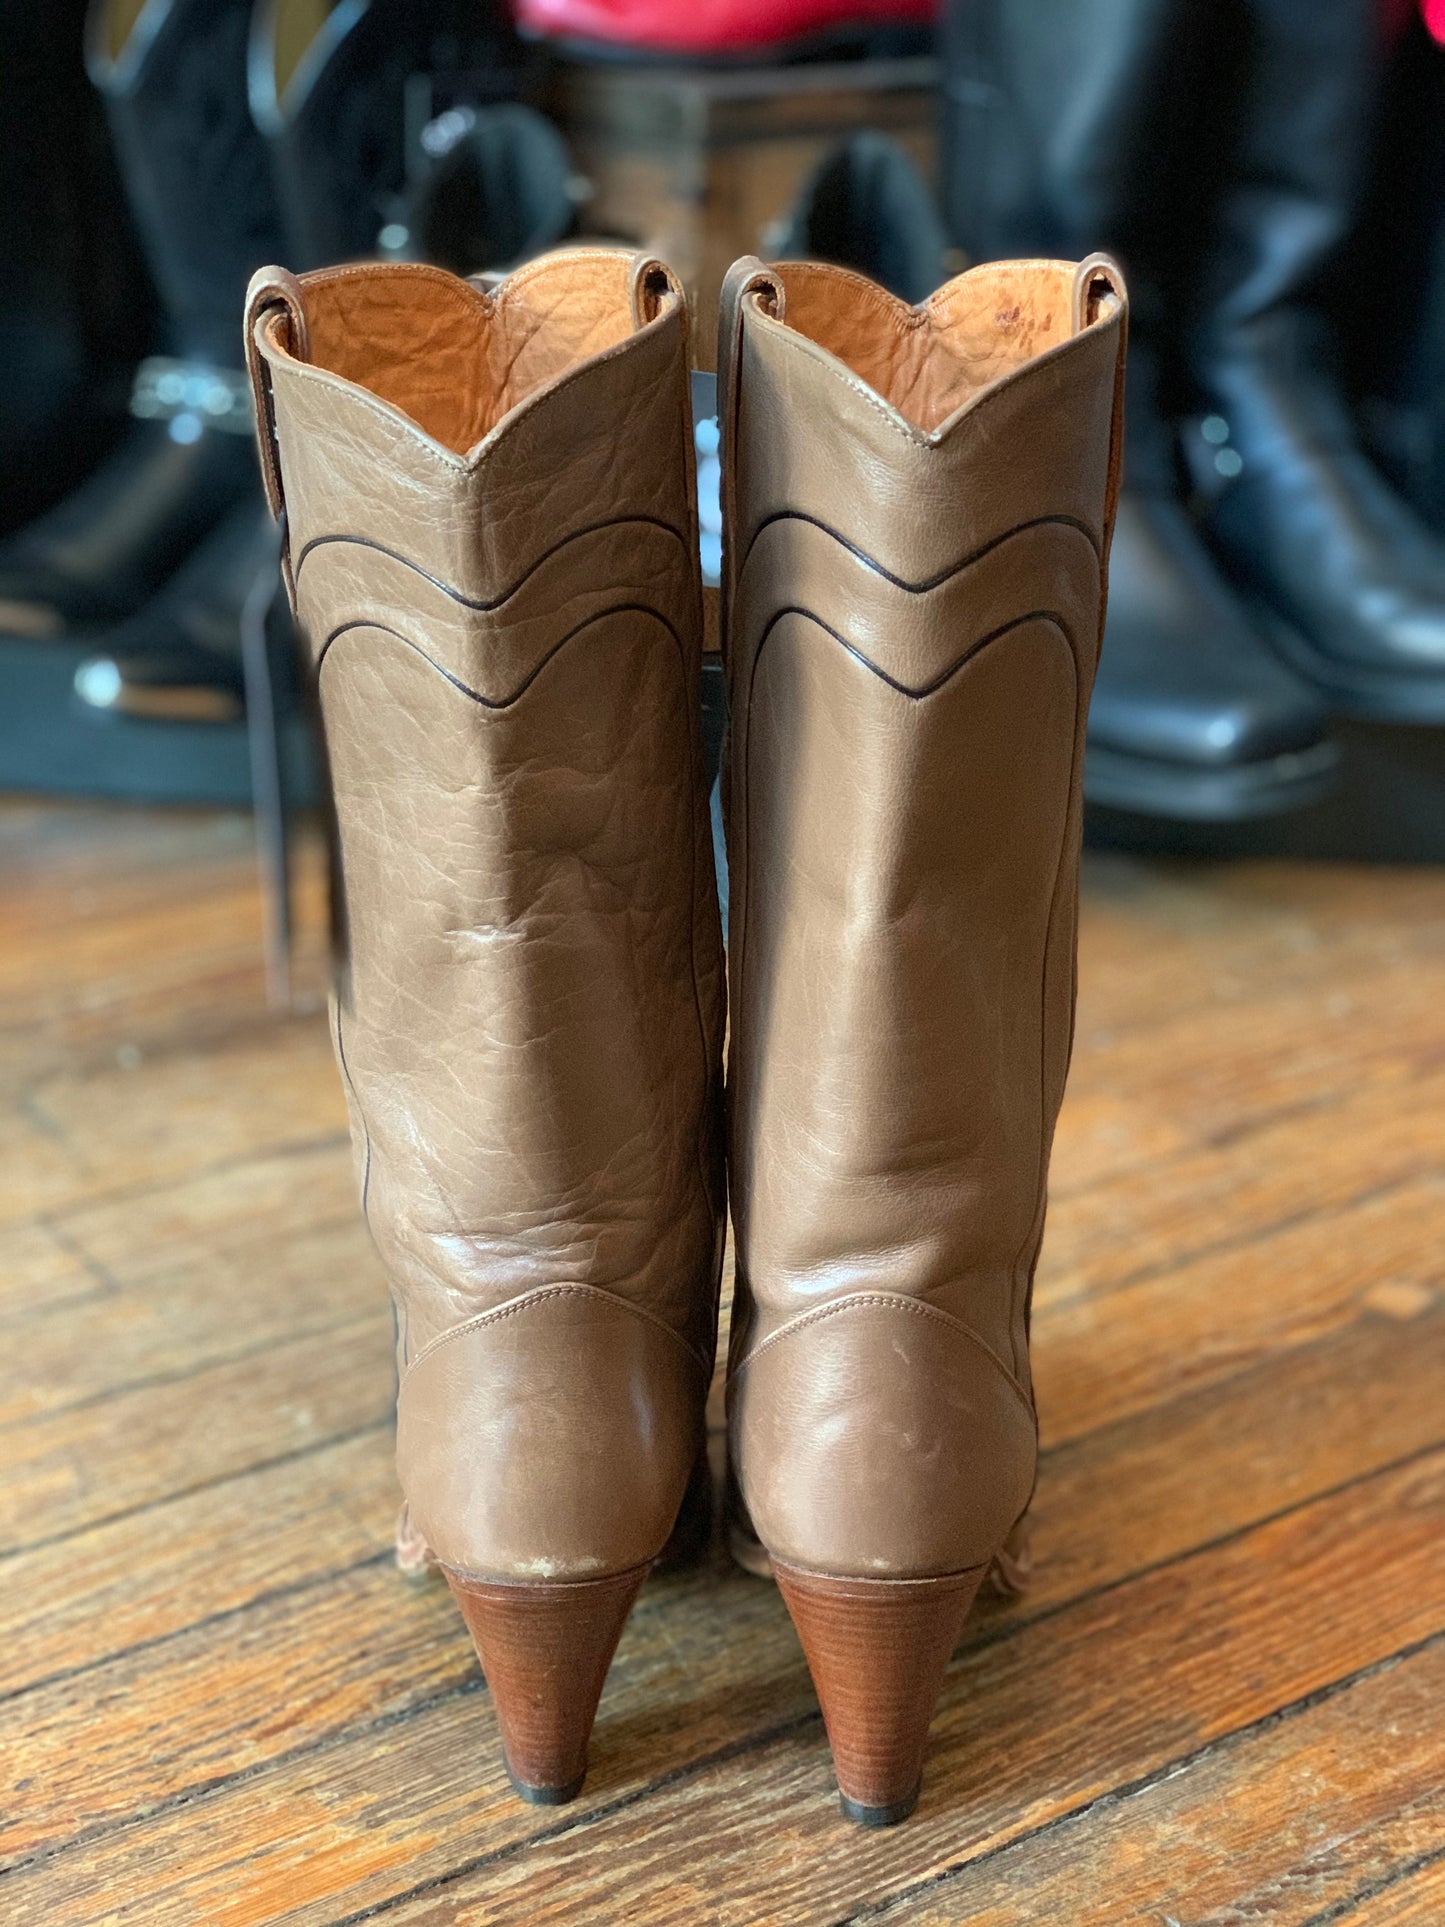 Vintage Dan Post Brown High-Heeled 70’s Style Cowboy Boots